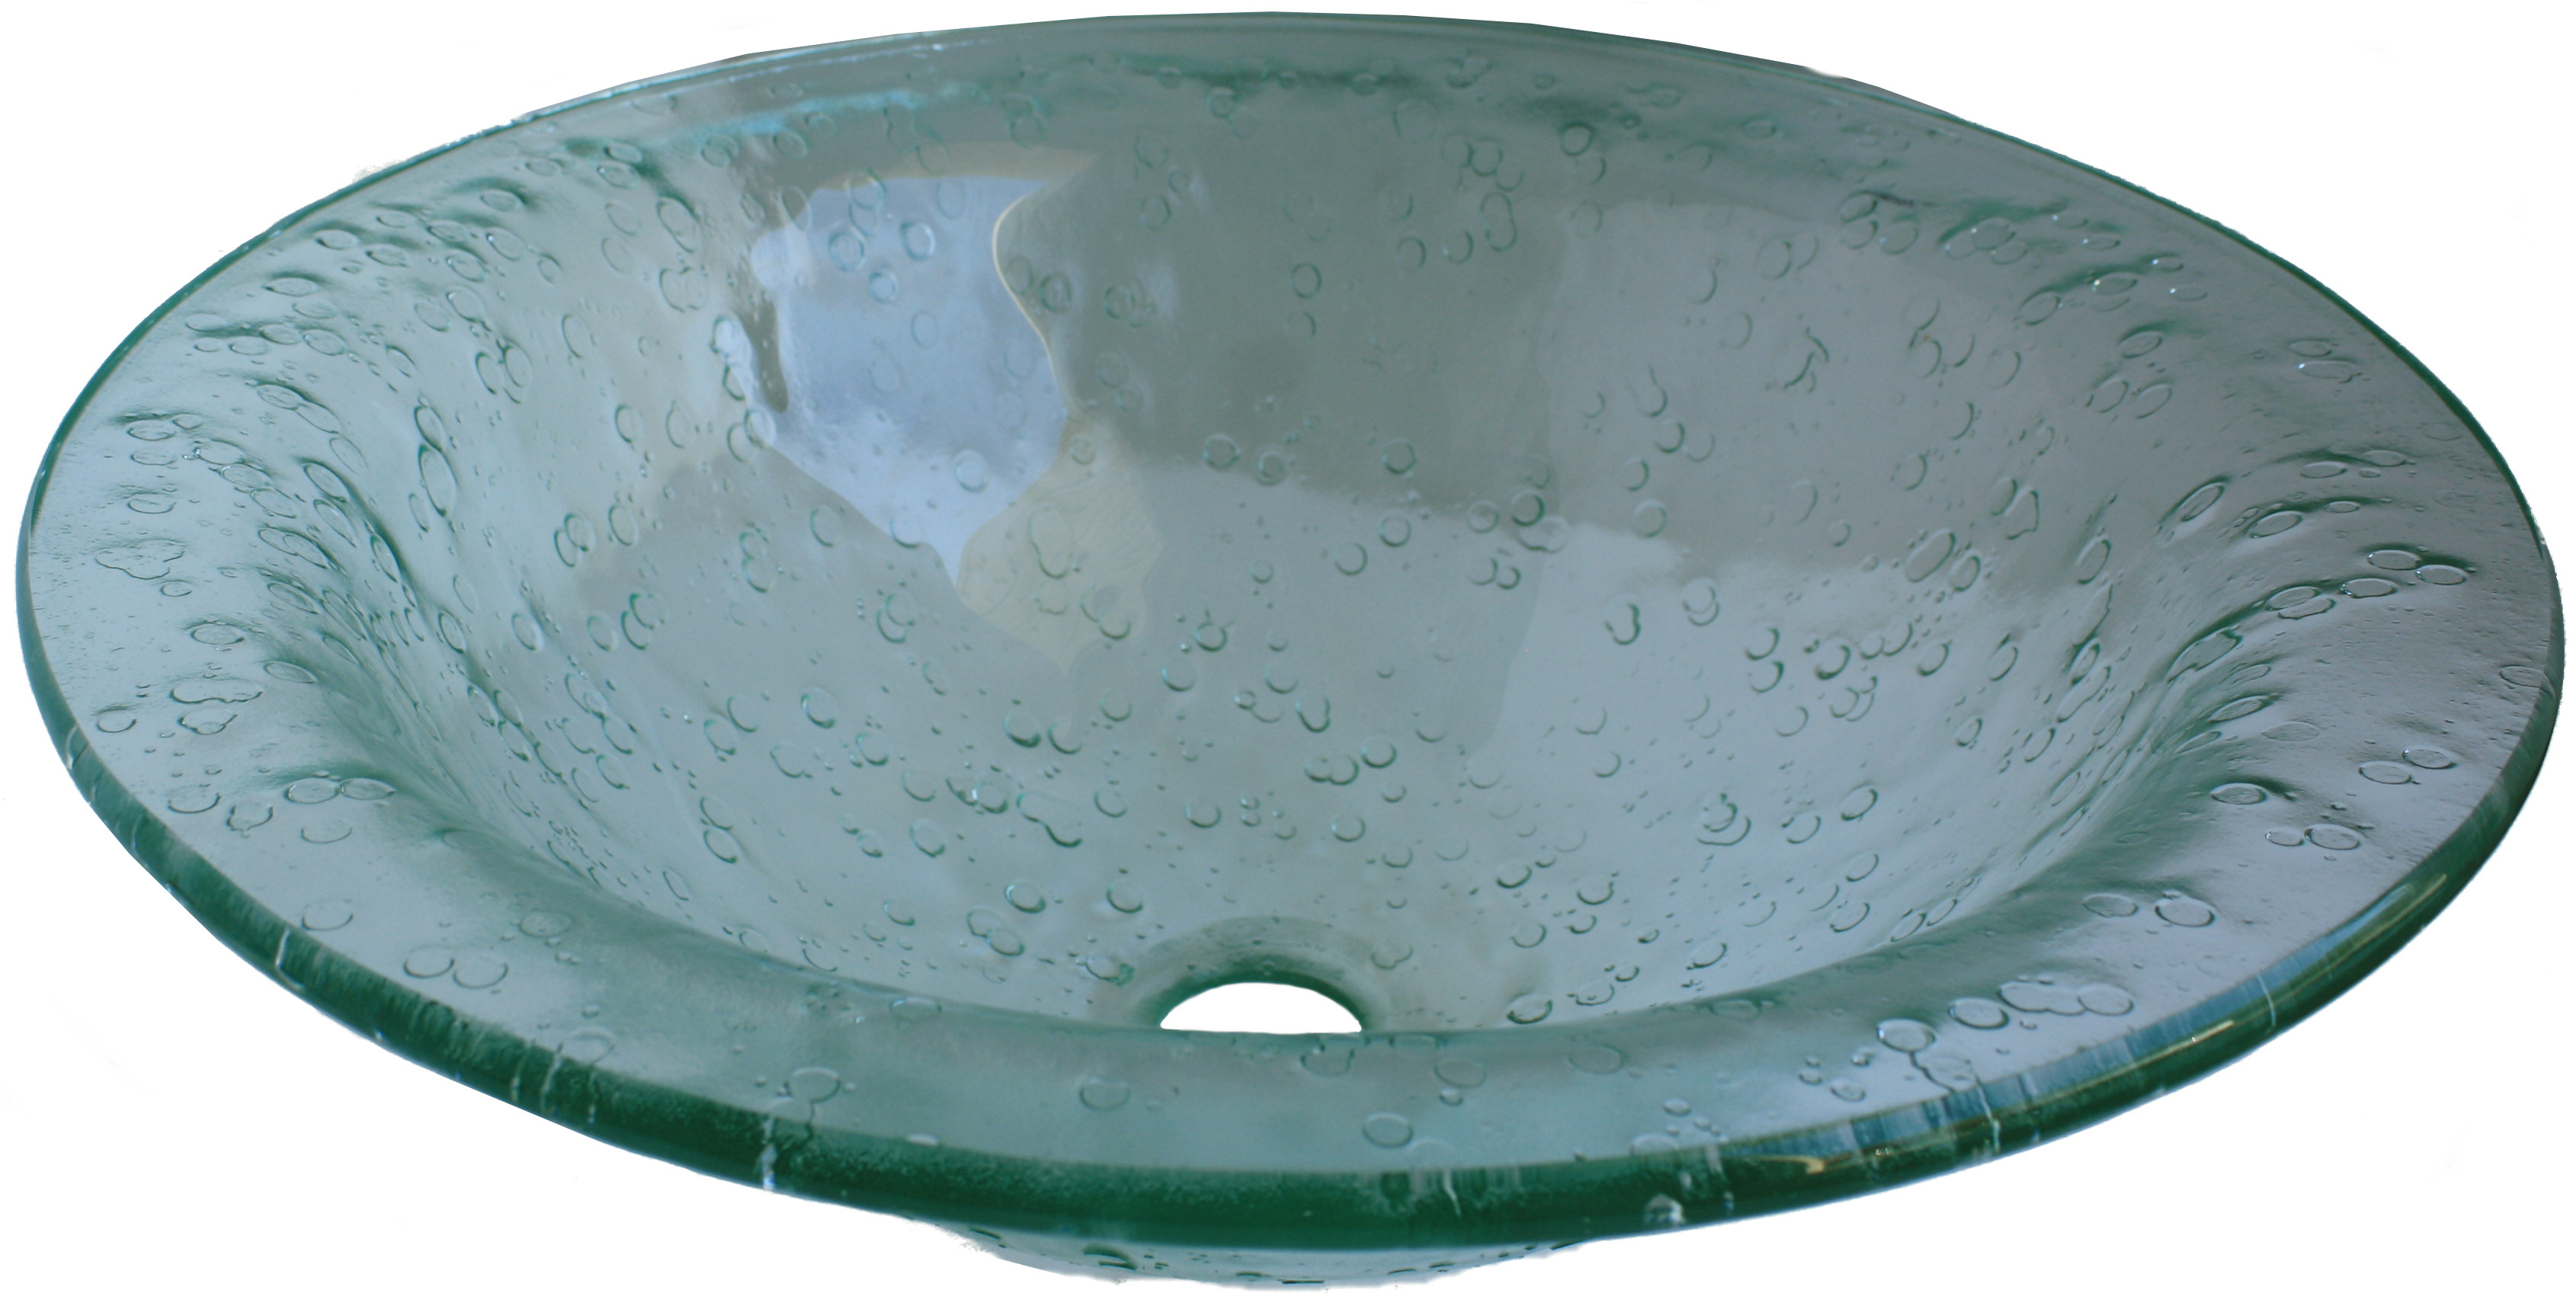 Above Counter Glass Vessel Basin - Water Drops